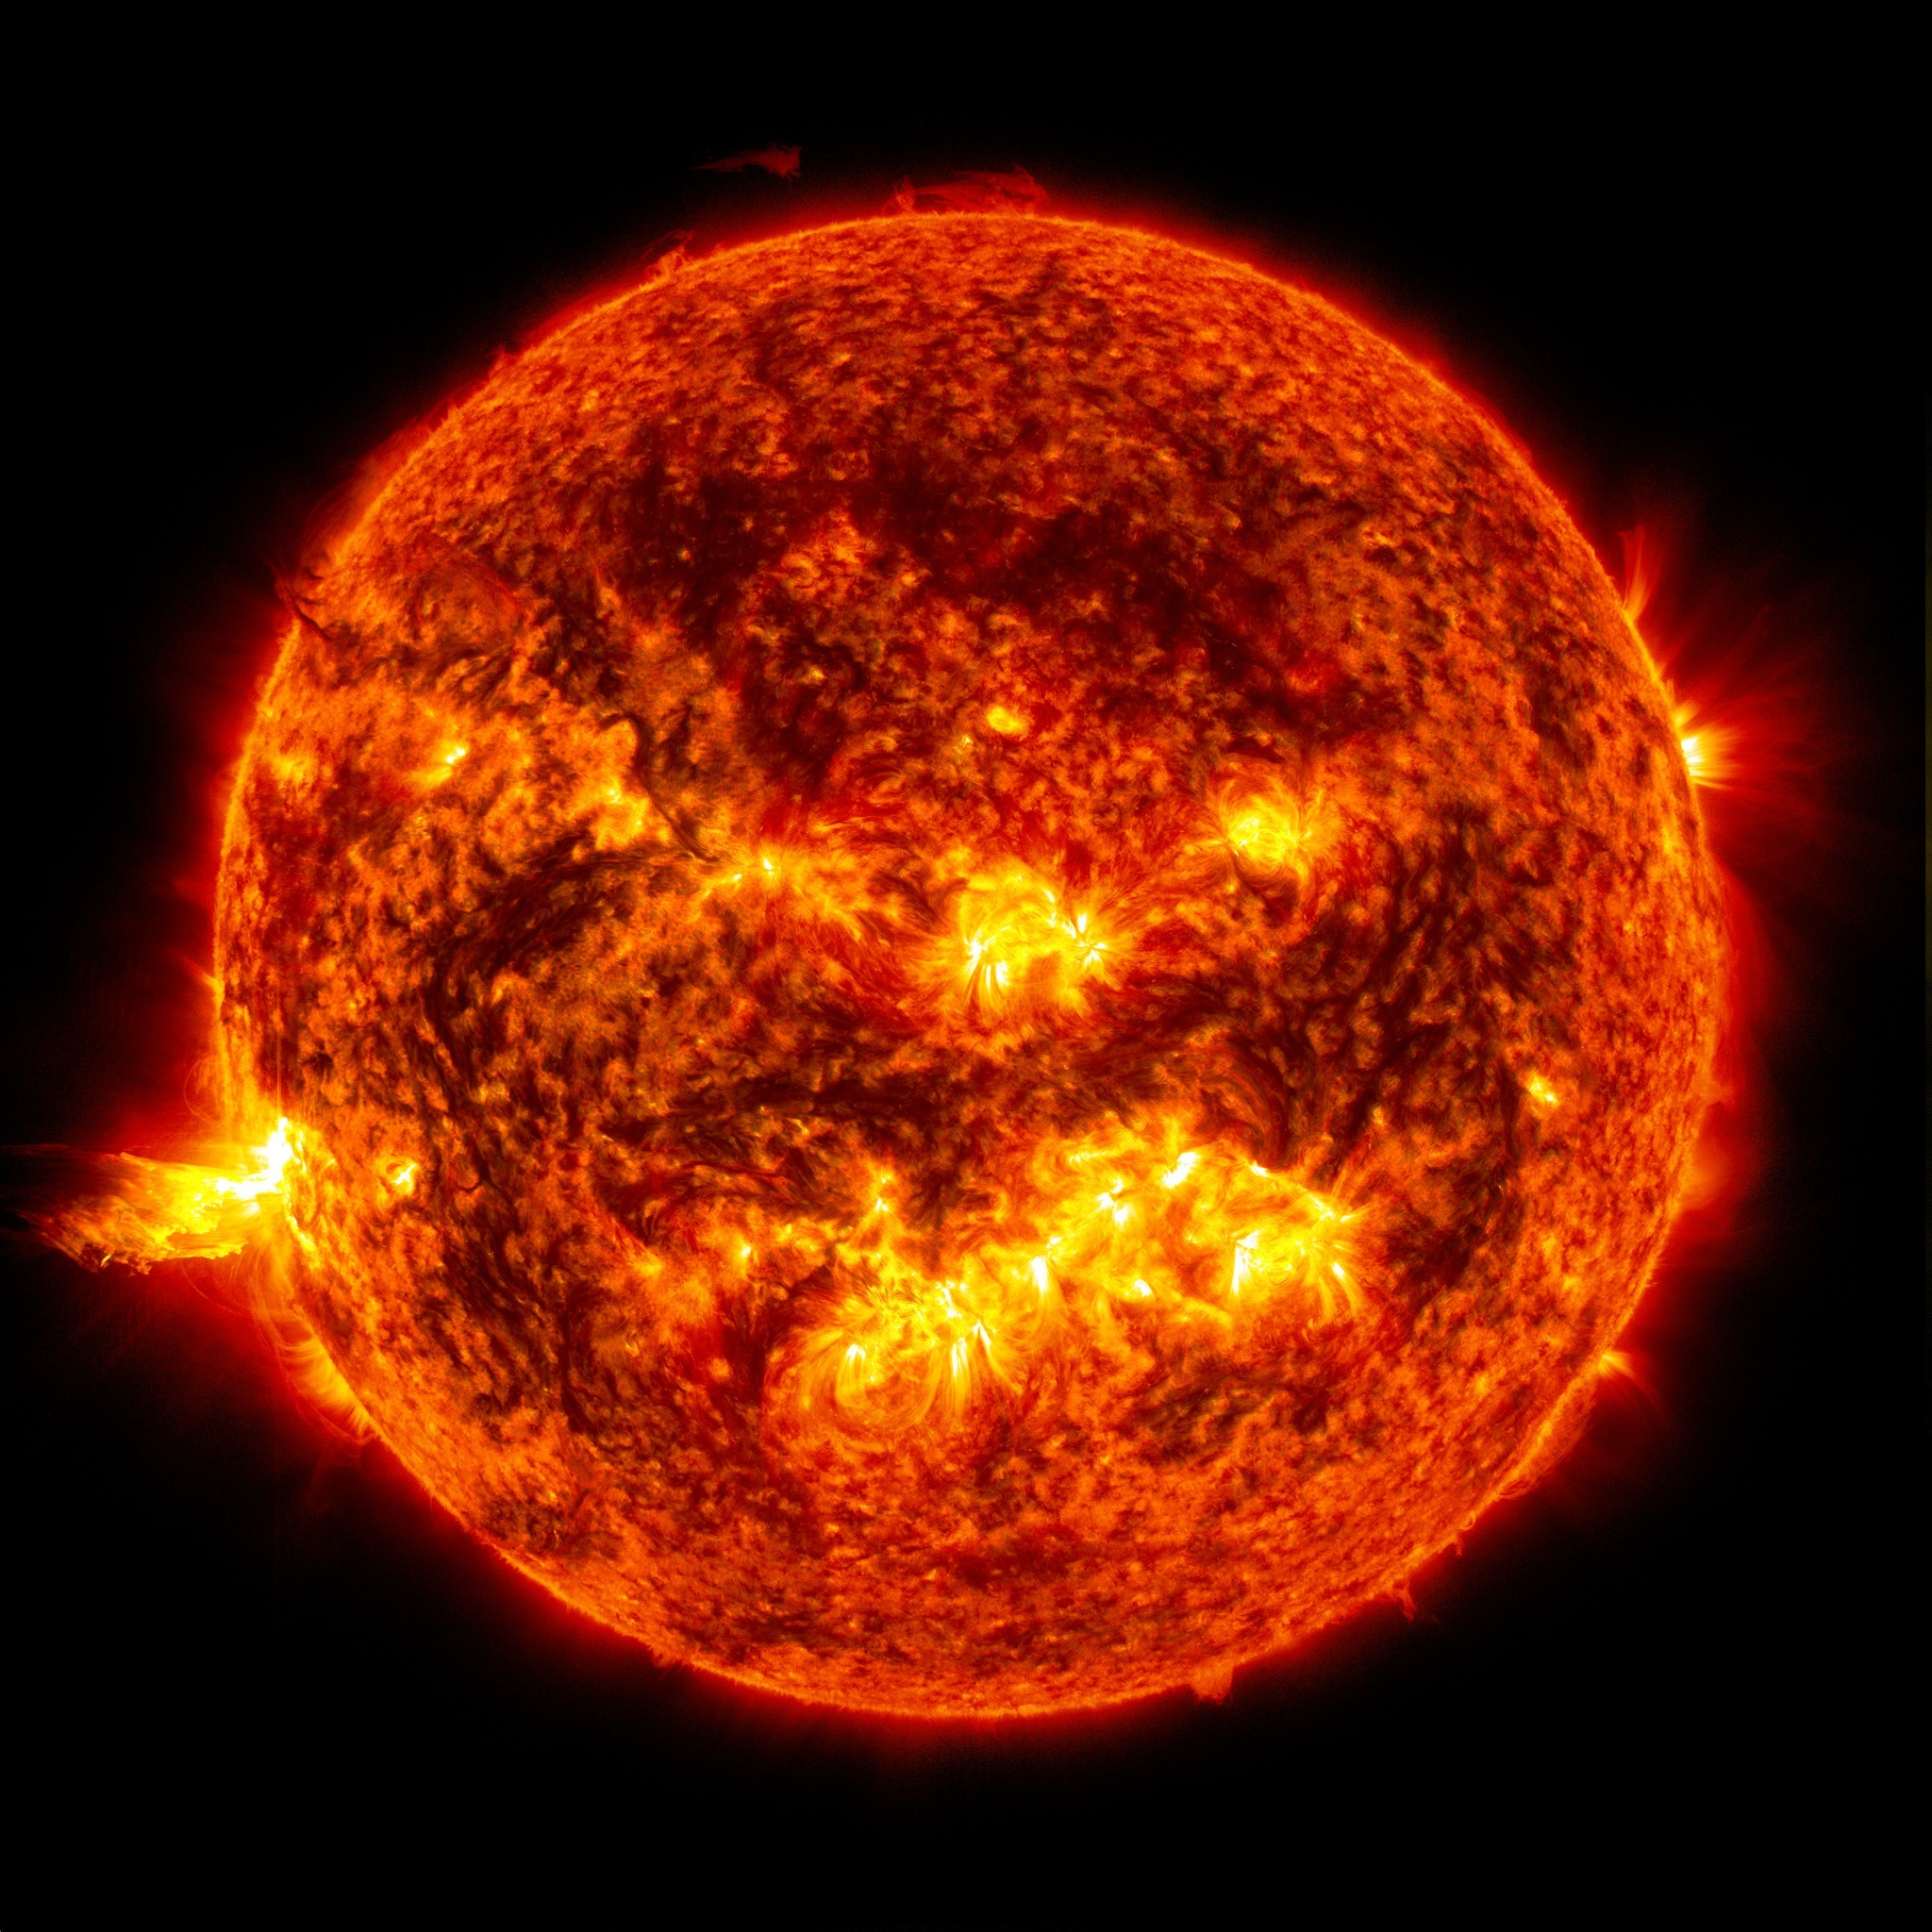 This image from 2013 shows the bright light of a solar flare on the left side of the sun and an eruption of solar material shooting through the sun’s atmosphere, called a prominence eruption. Credit: NASA/Goddard/SDO.